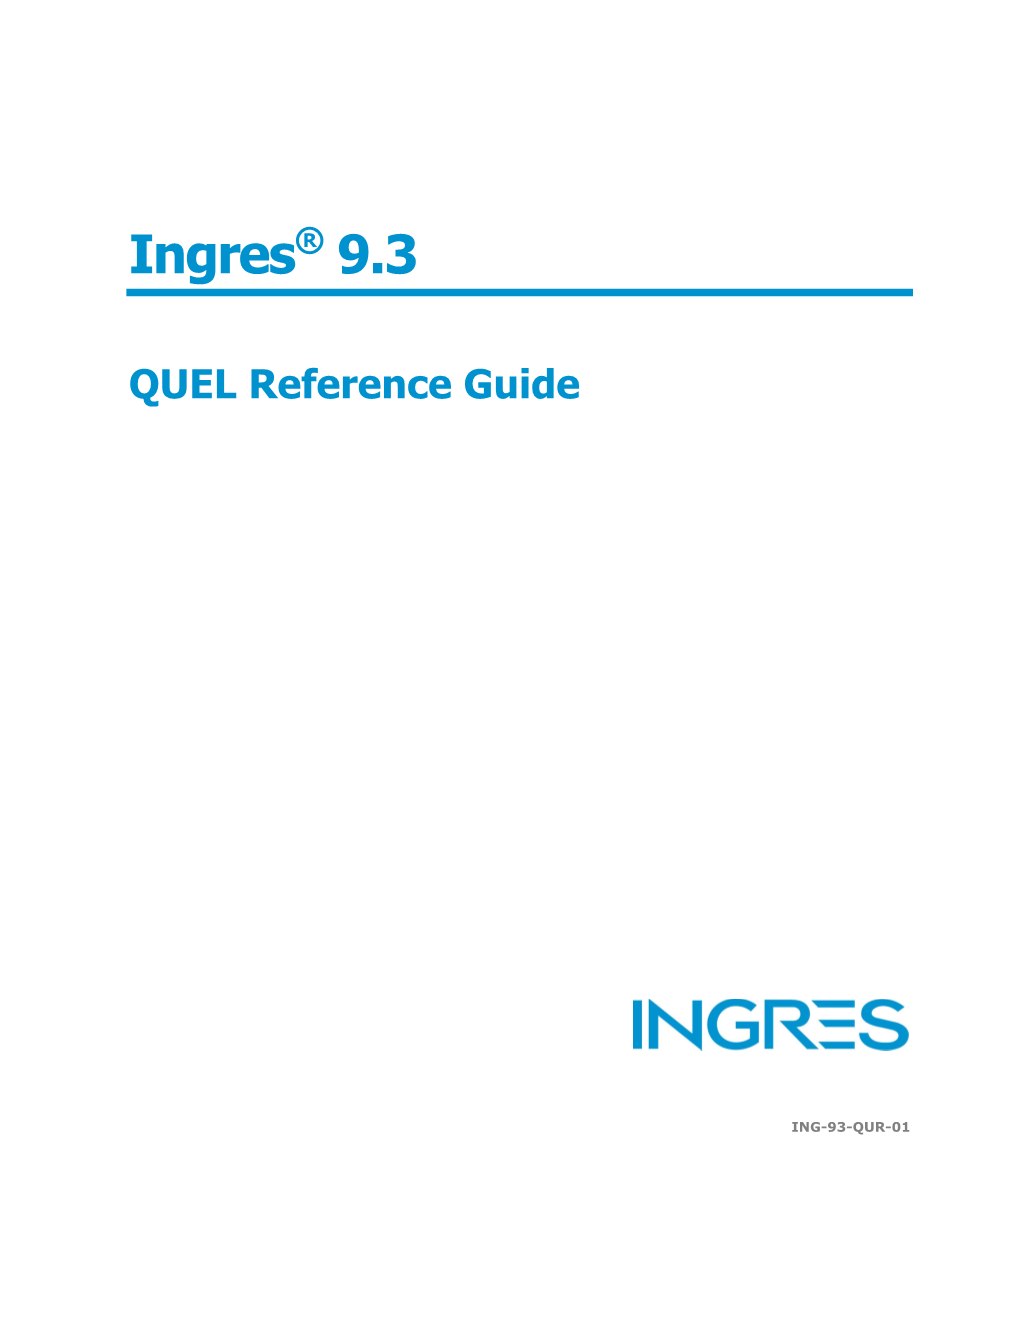 Ingres 9.3 QUEL Reference Guide